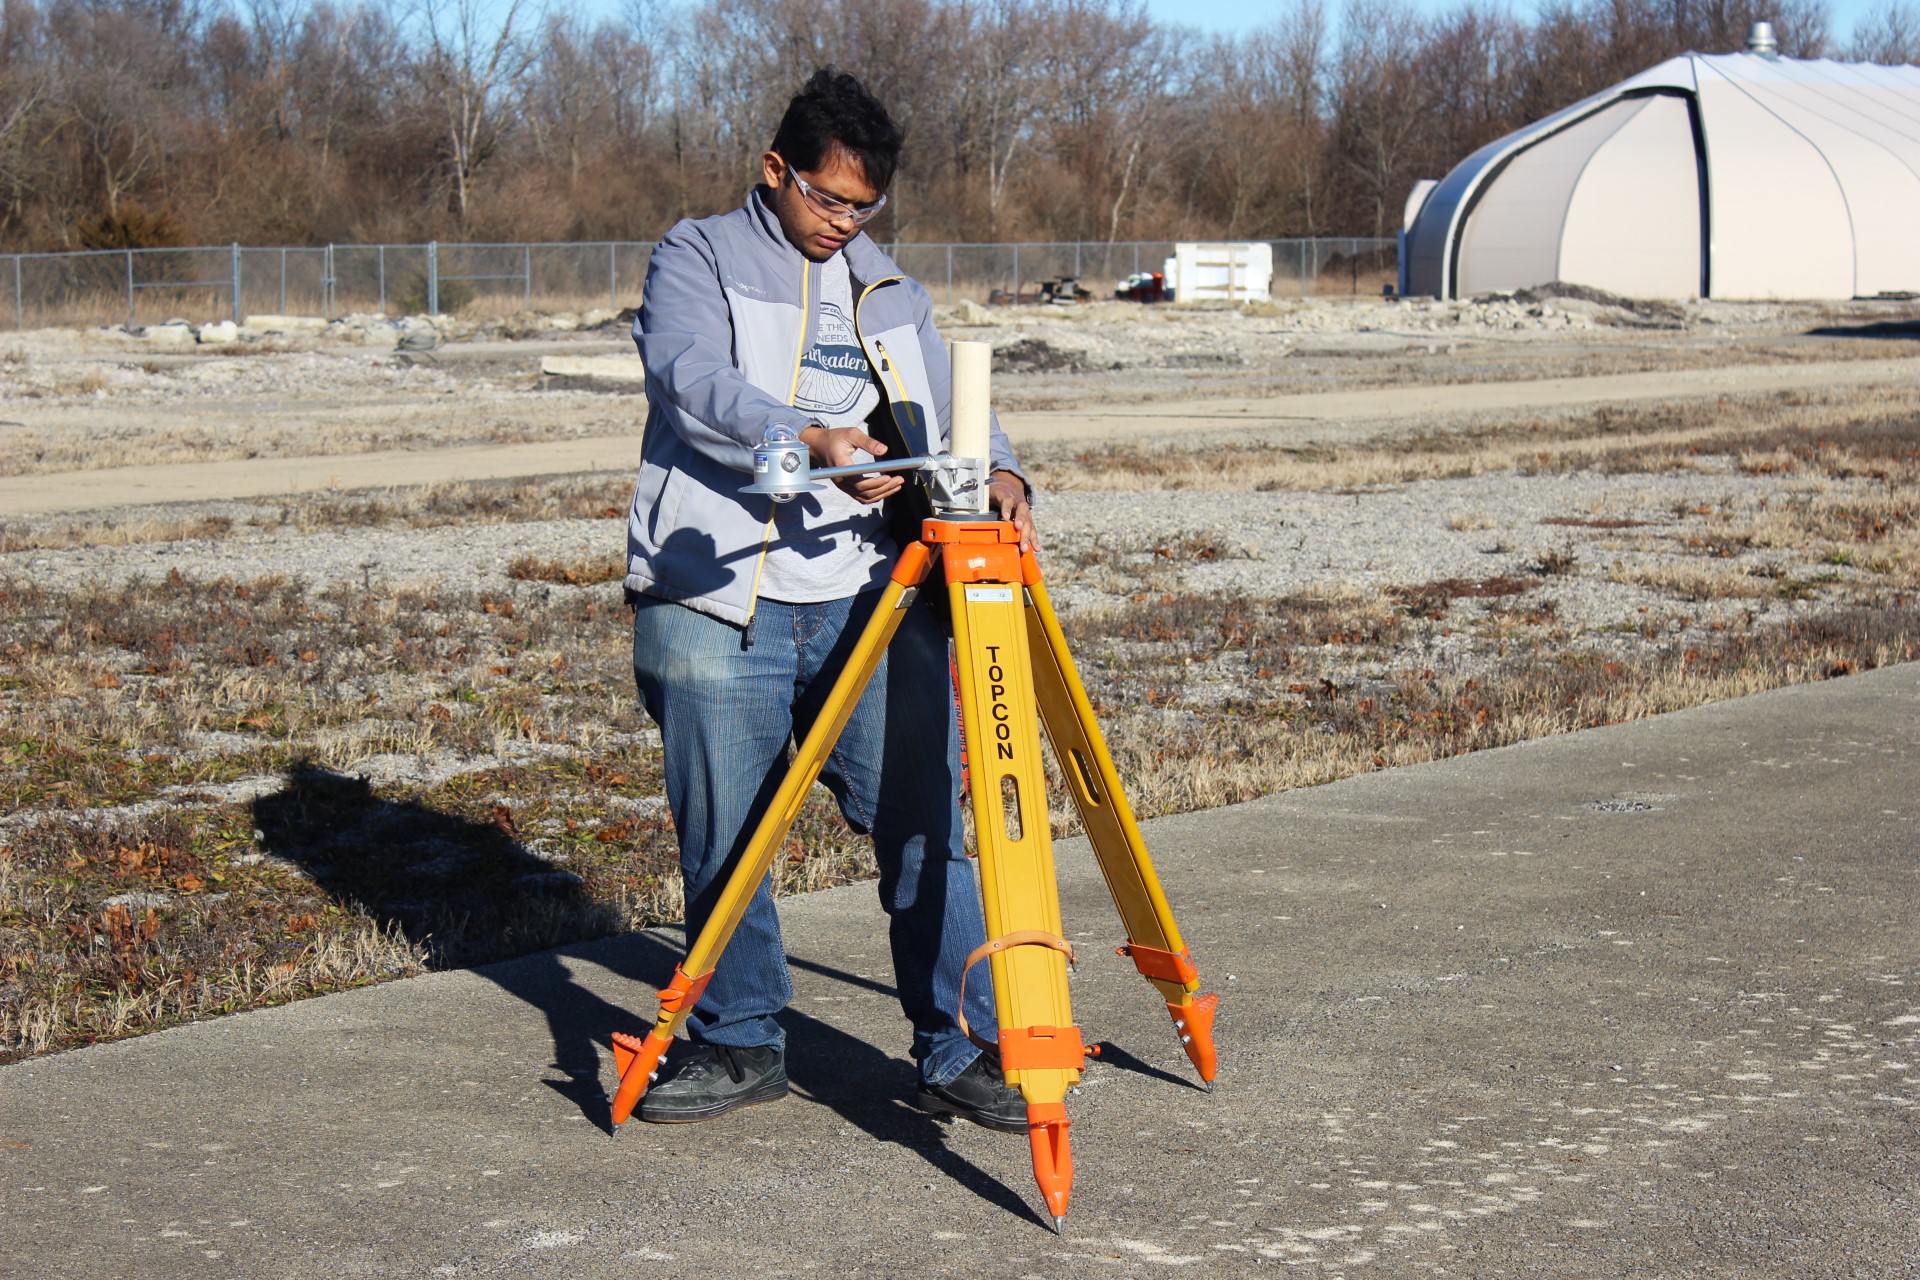 Sushobhan Sen, UIUC CEE alumnus and University of Pittsburgh postdoctoral researcher, sets up an albedometer earlier on Dec. 4 at Illinois Center for Transportation, where he conducted pavement reflectance experiments. The device measures the solar energy and the energy reflected from pavement surfaces to determine air and surface temperatures.